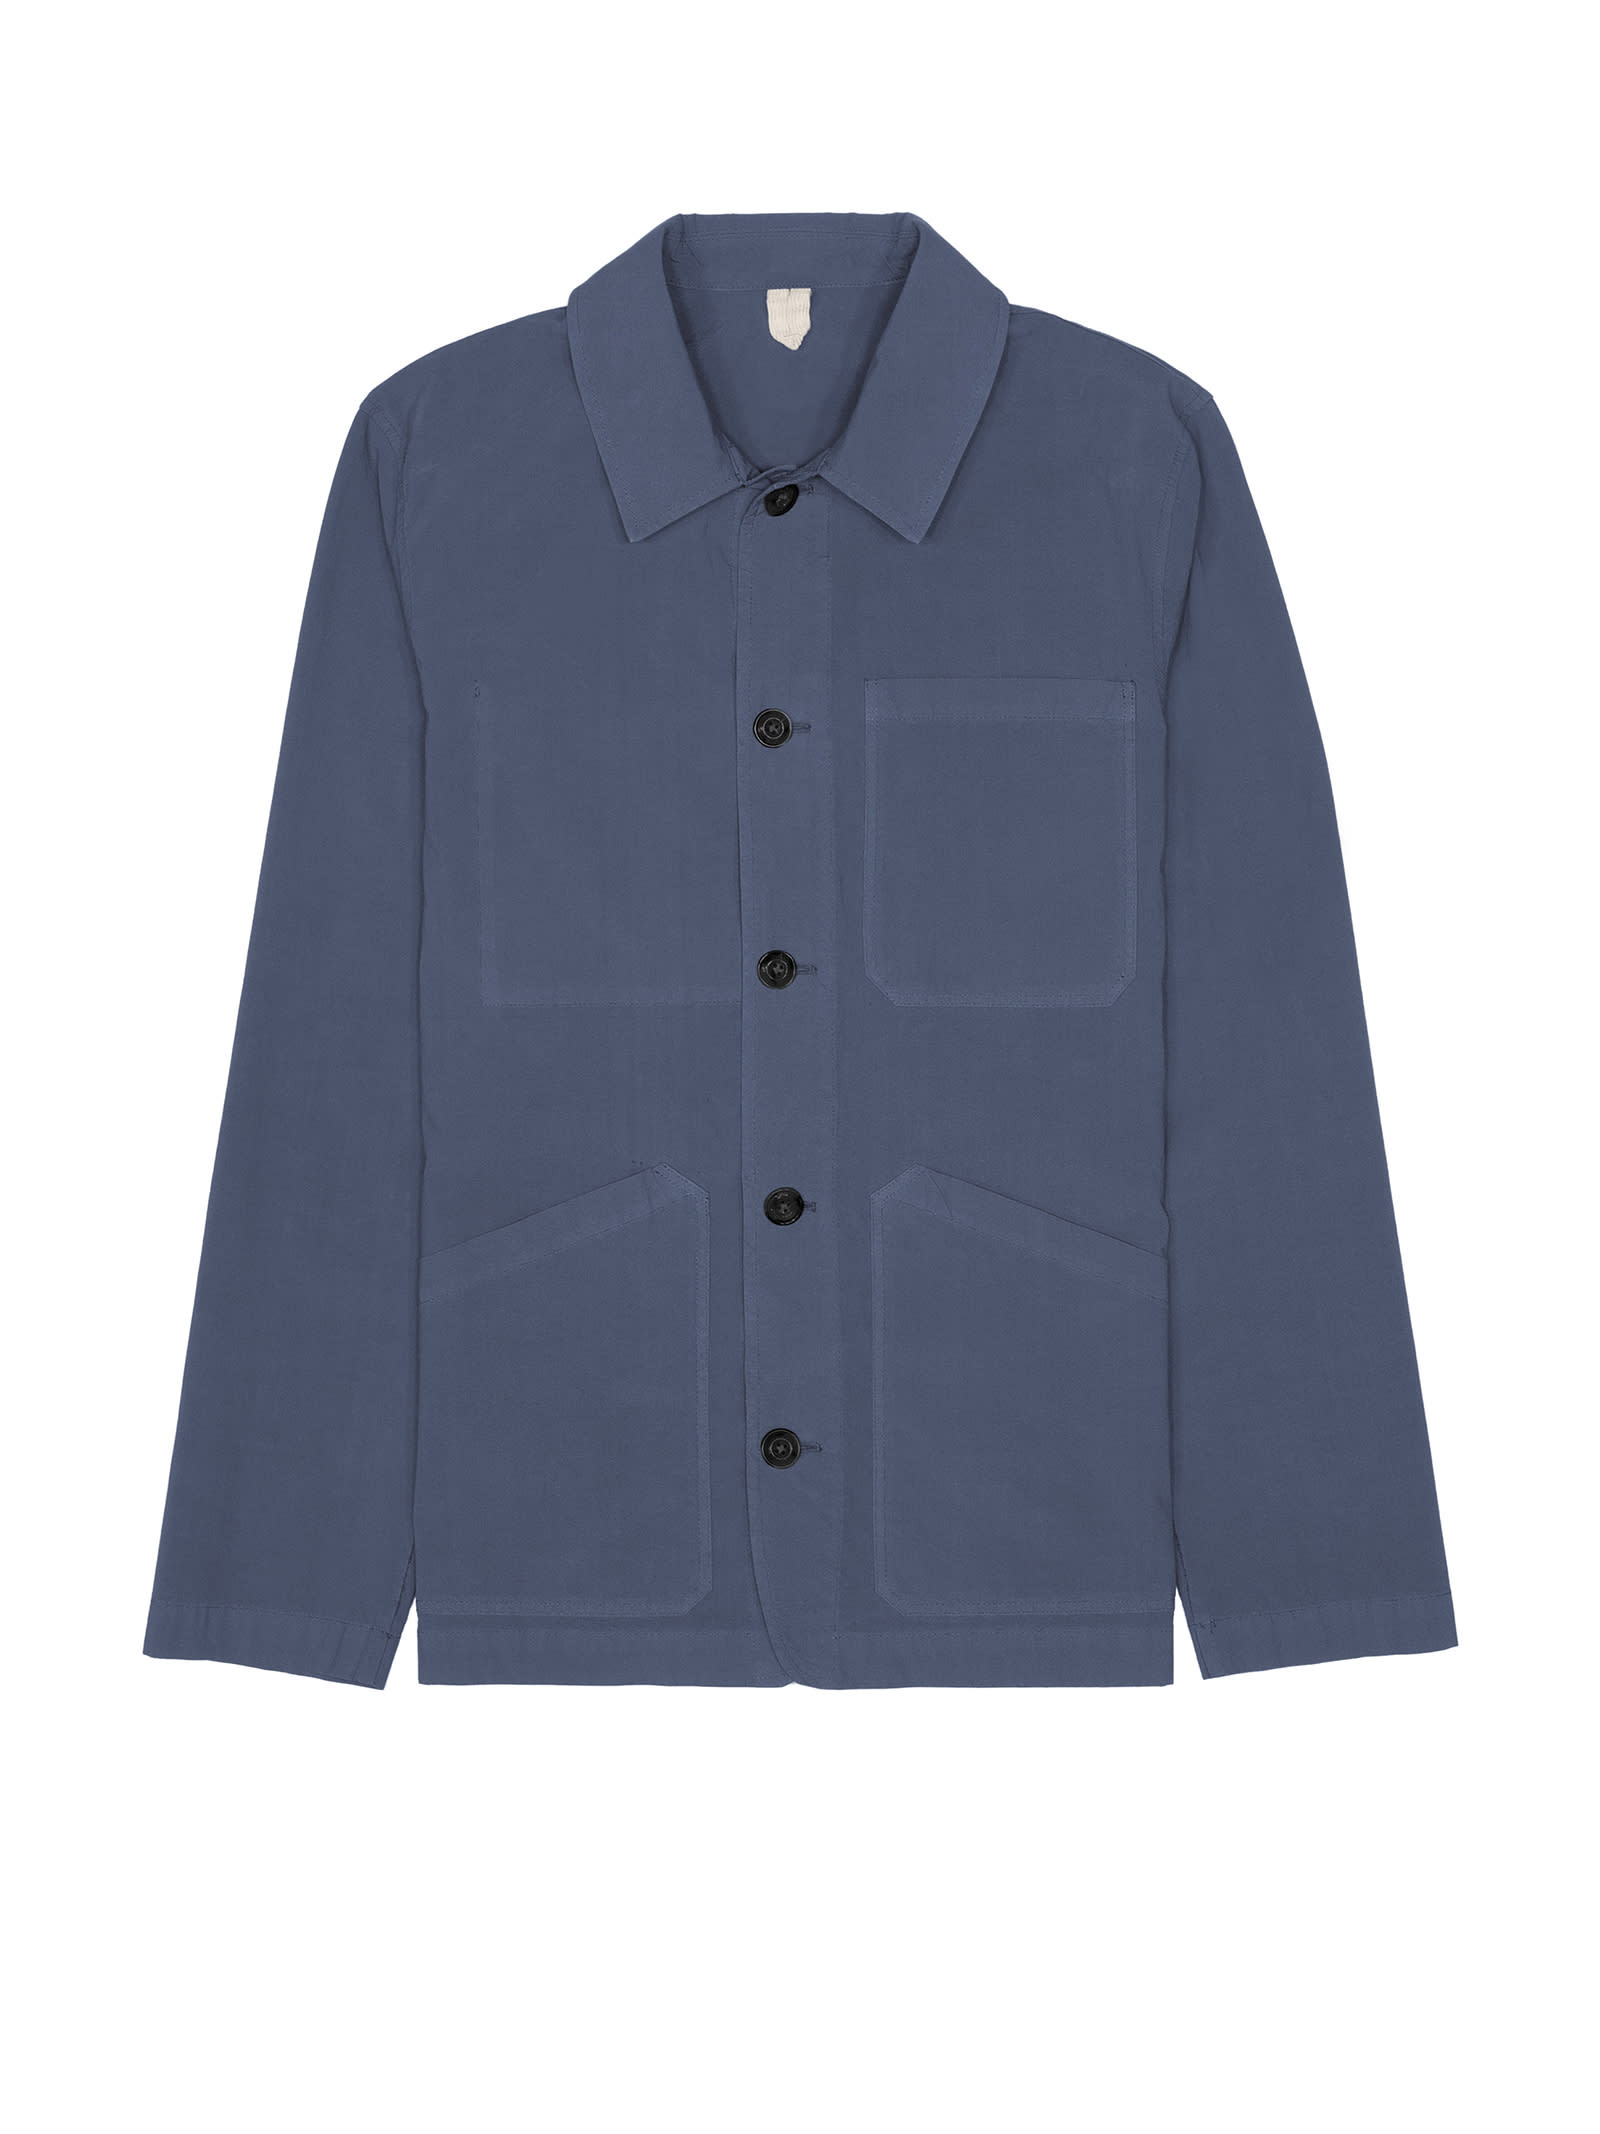 Air Force Blue Cotton Jacket With Buttons